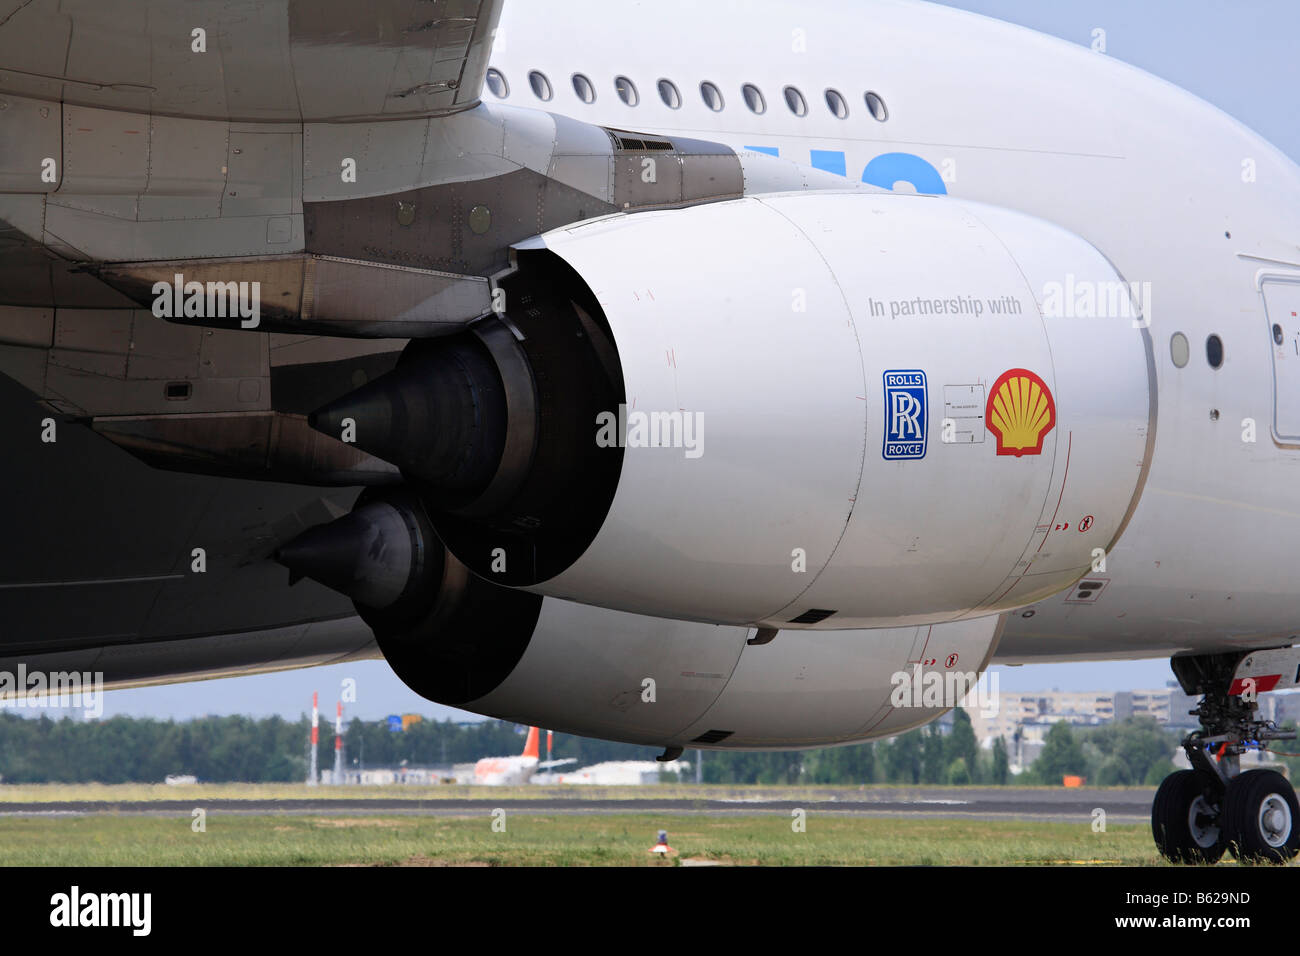 Engine, passenger plane, Airbus A 380 wide body aircraft Stock Photo